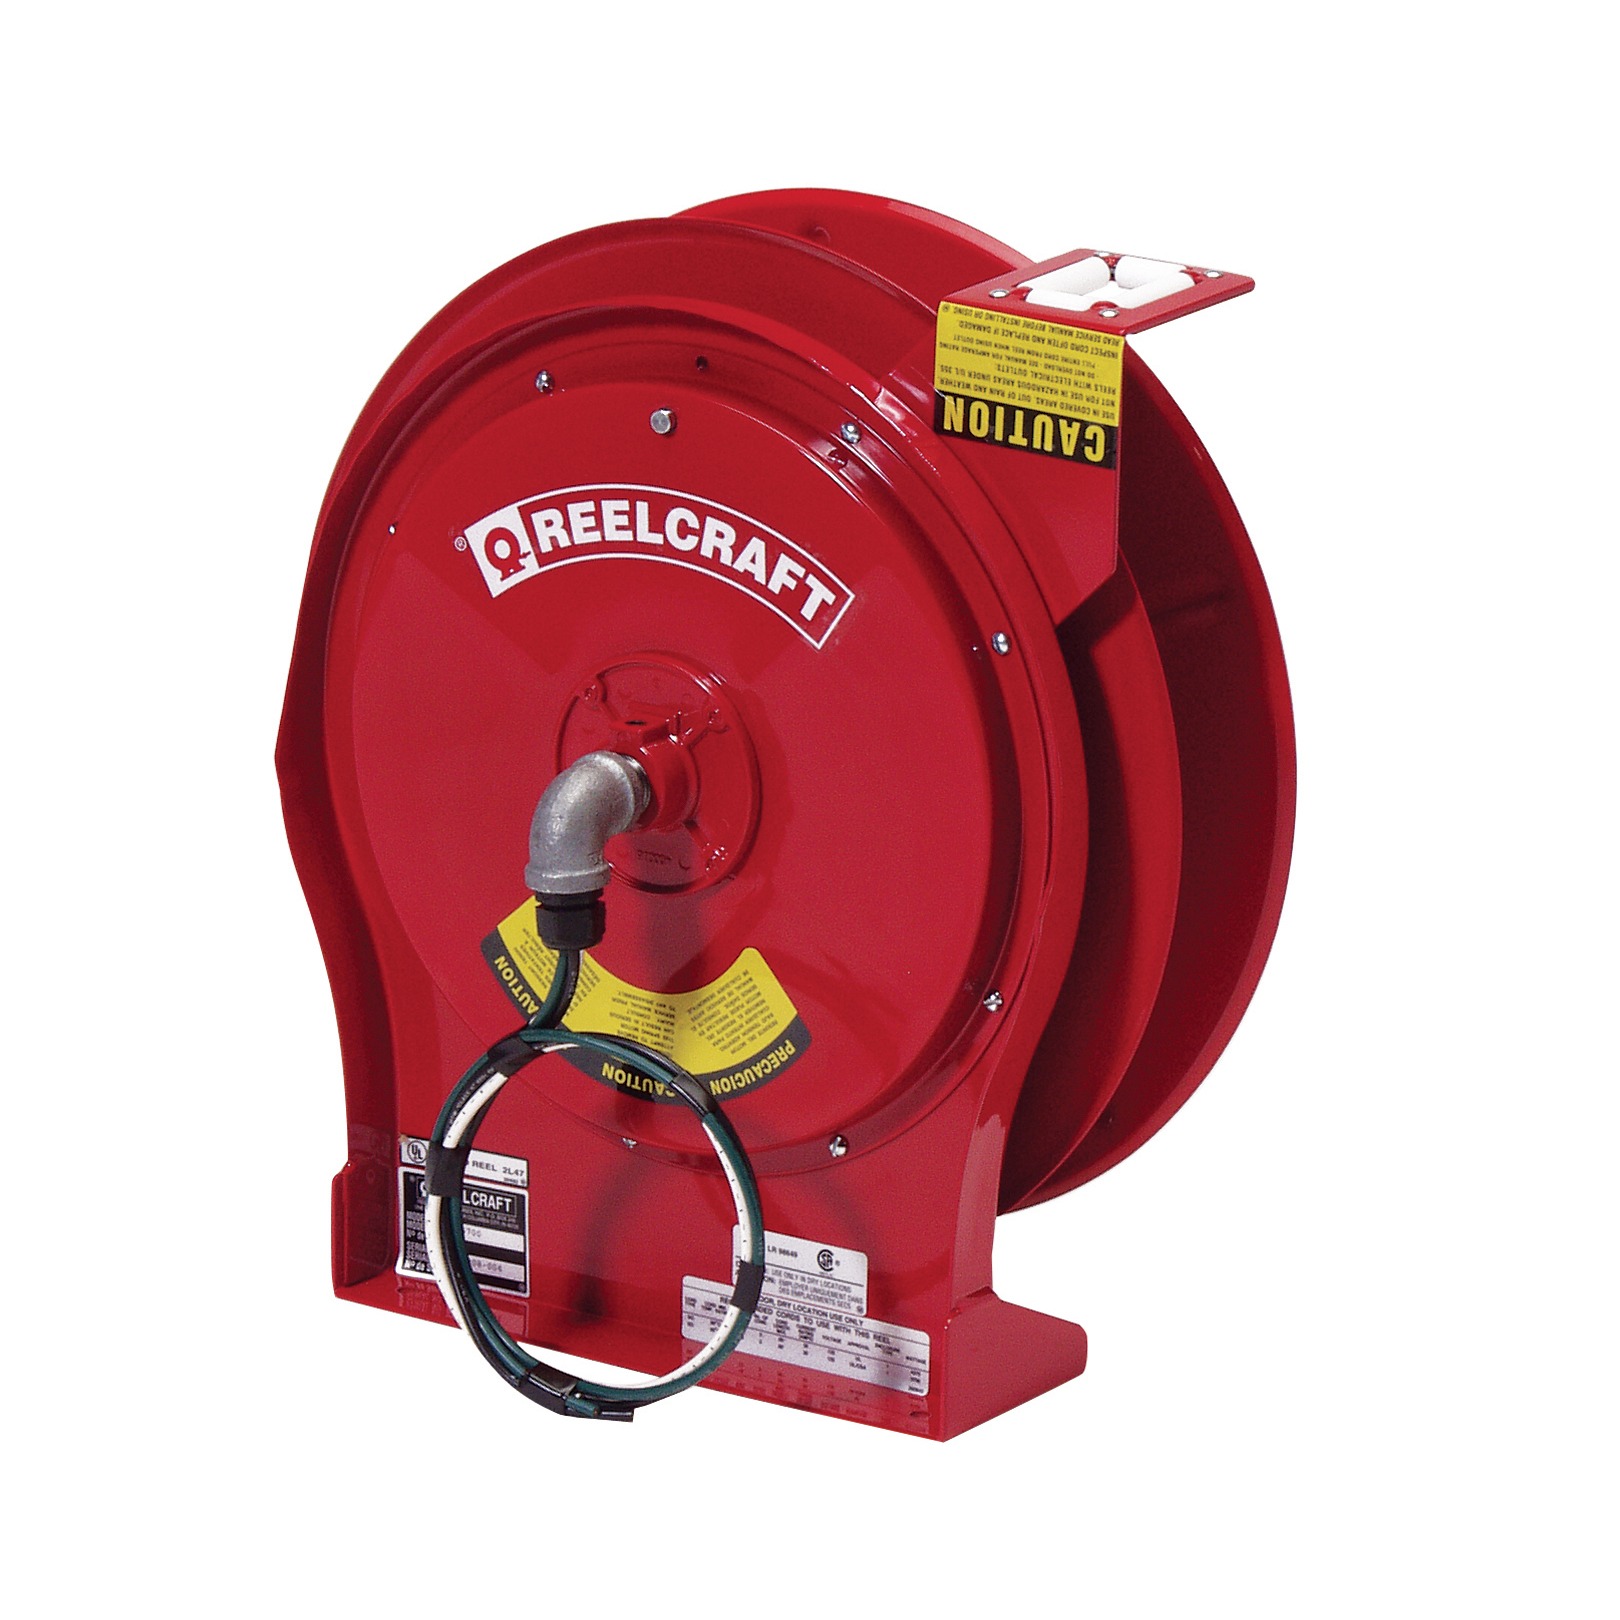 Reelcraft L 5700 - 10/3 50 ft. Premium Duty Bare Cord Reel